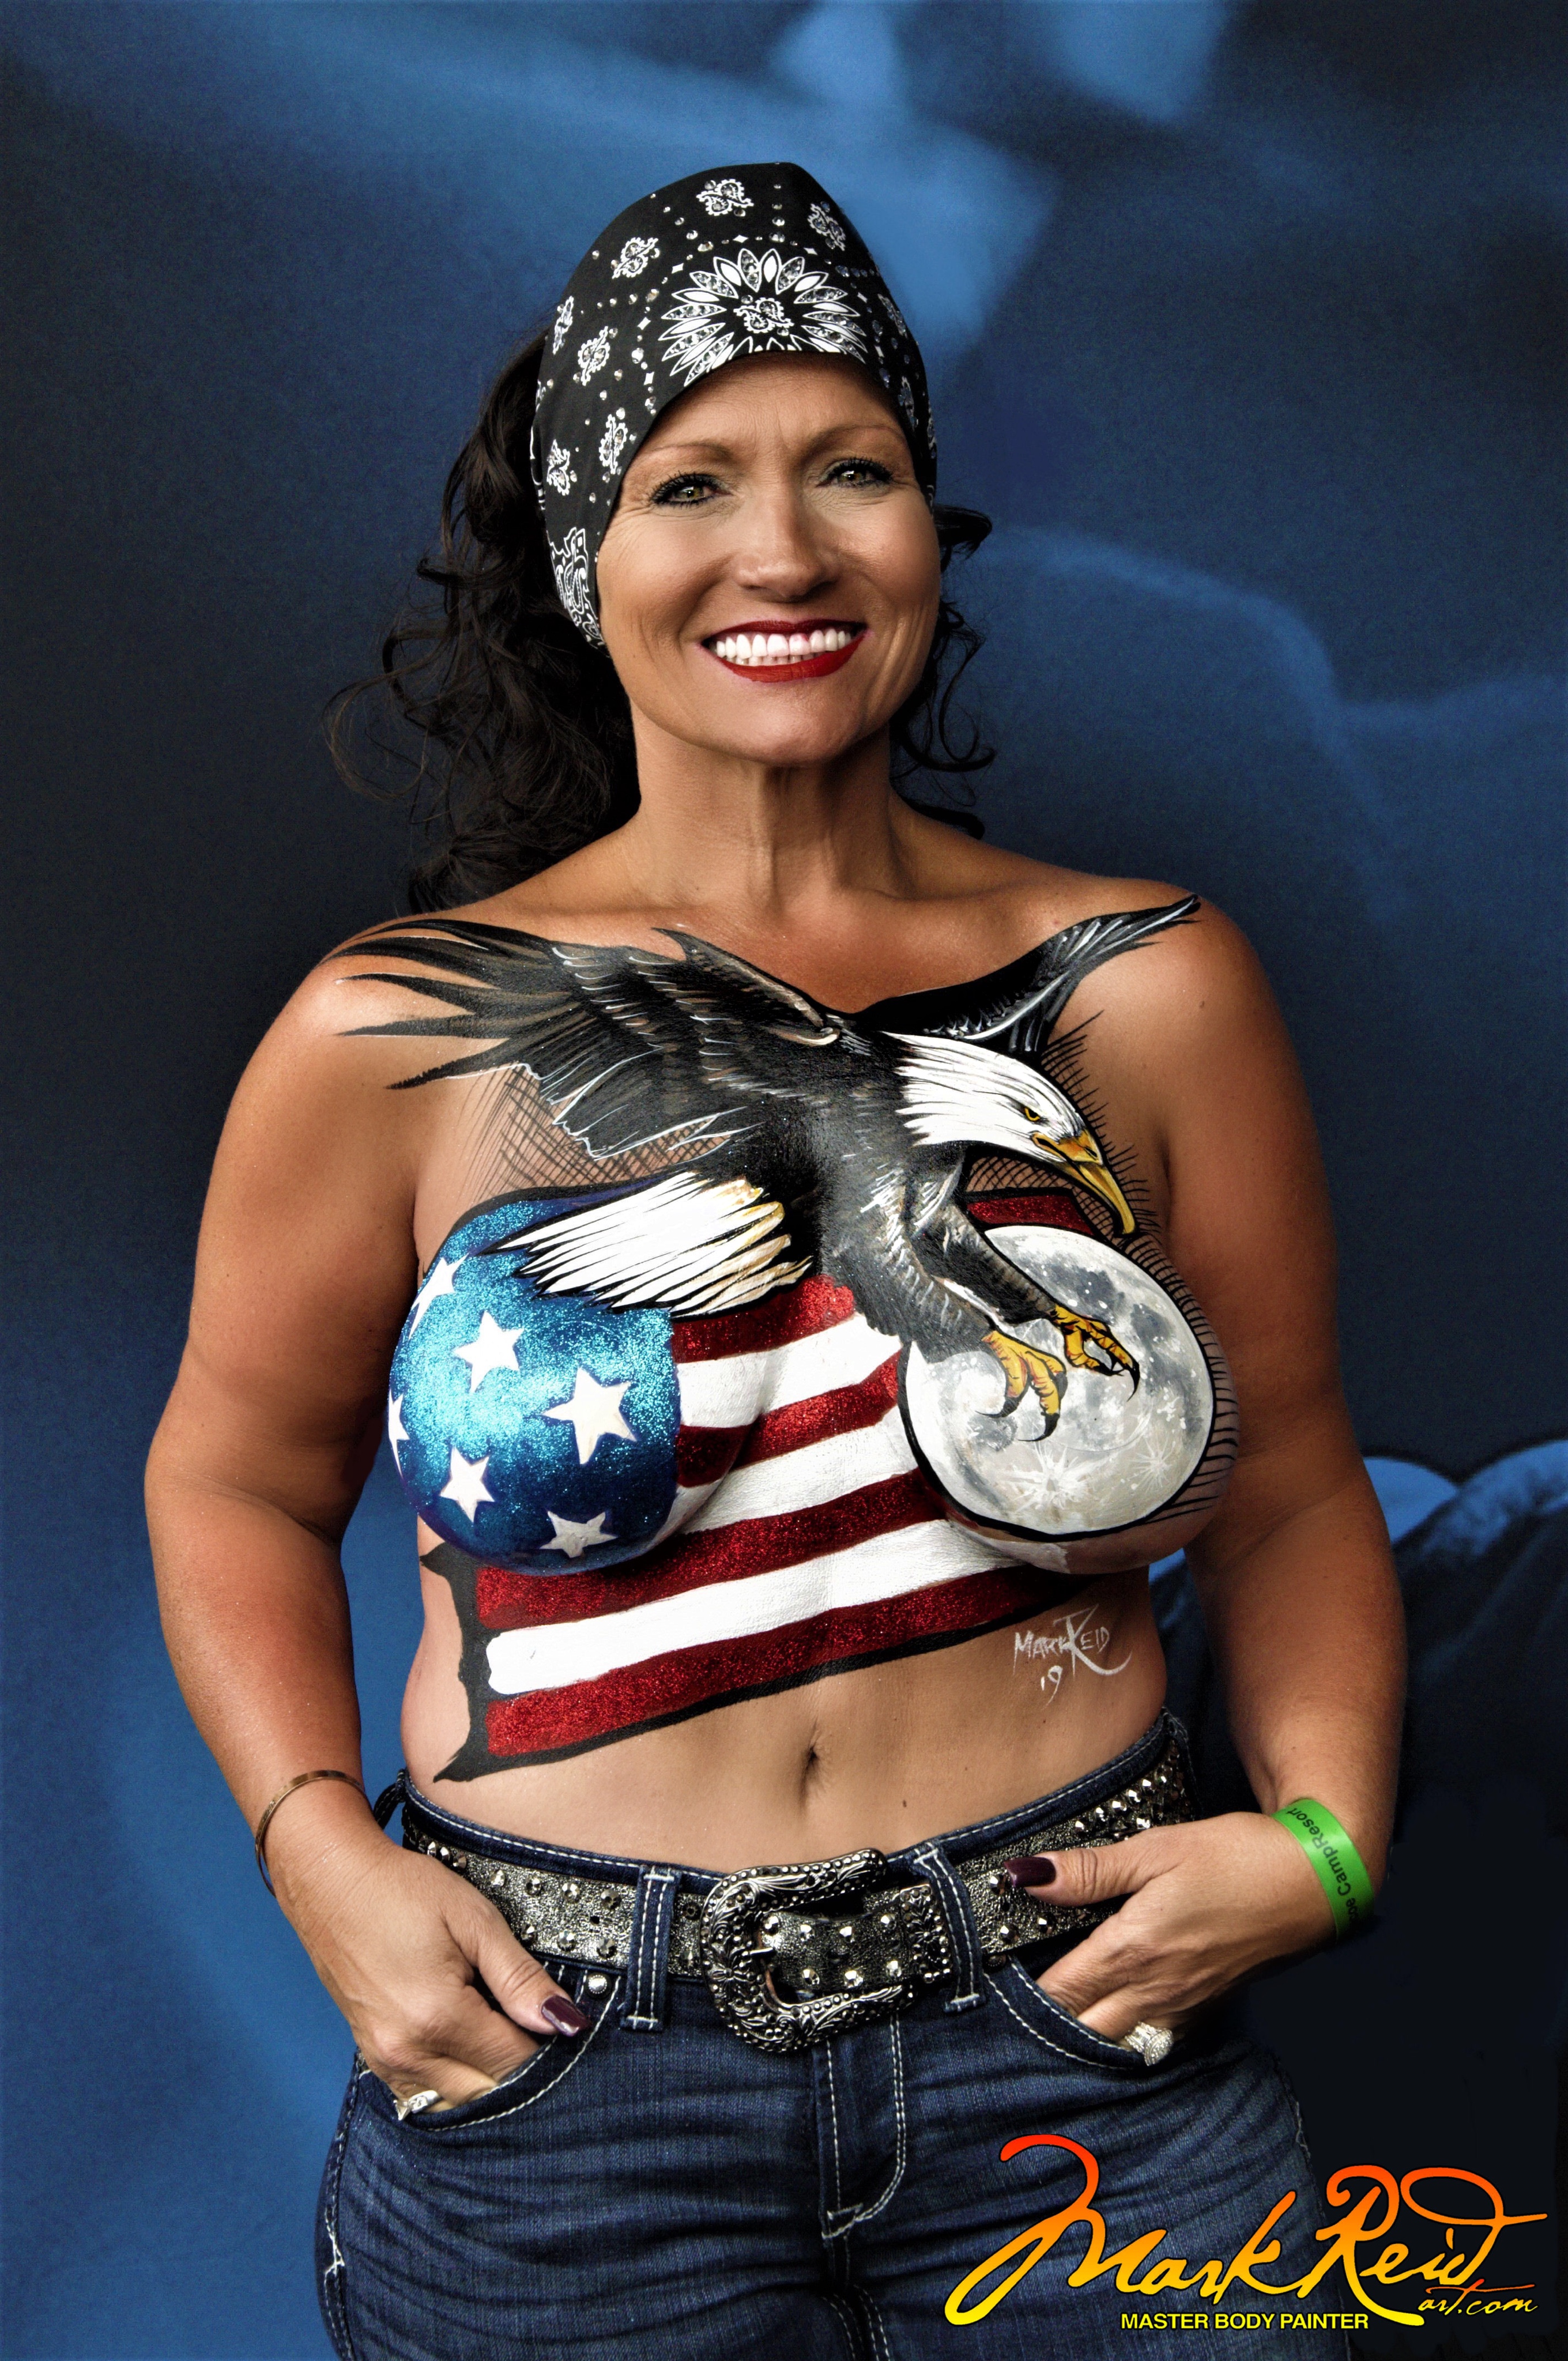 model with a detailed body painting featuring an eagle and the moon over the american flag